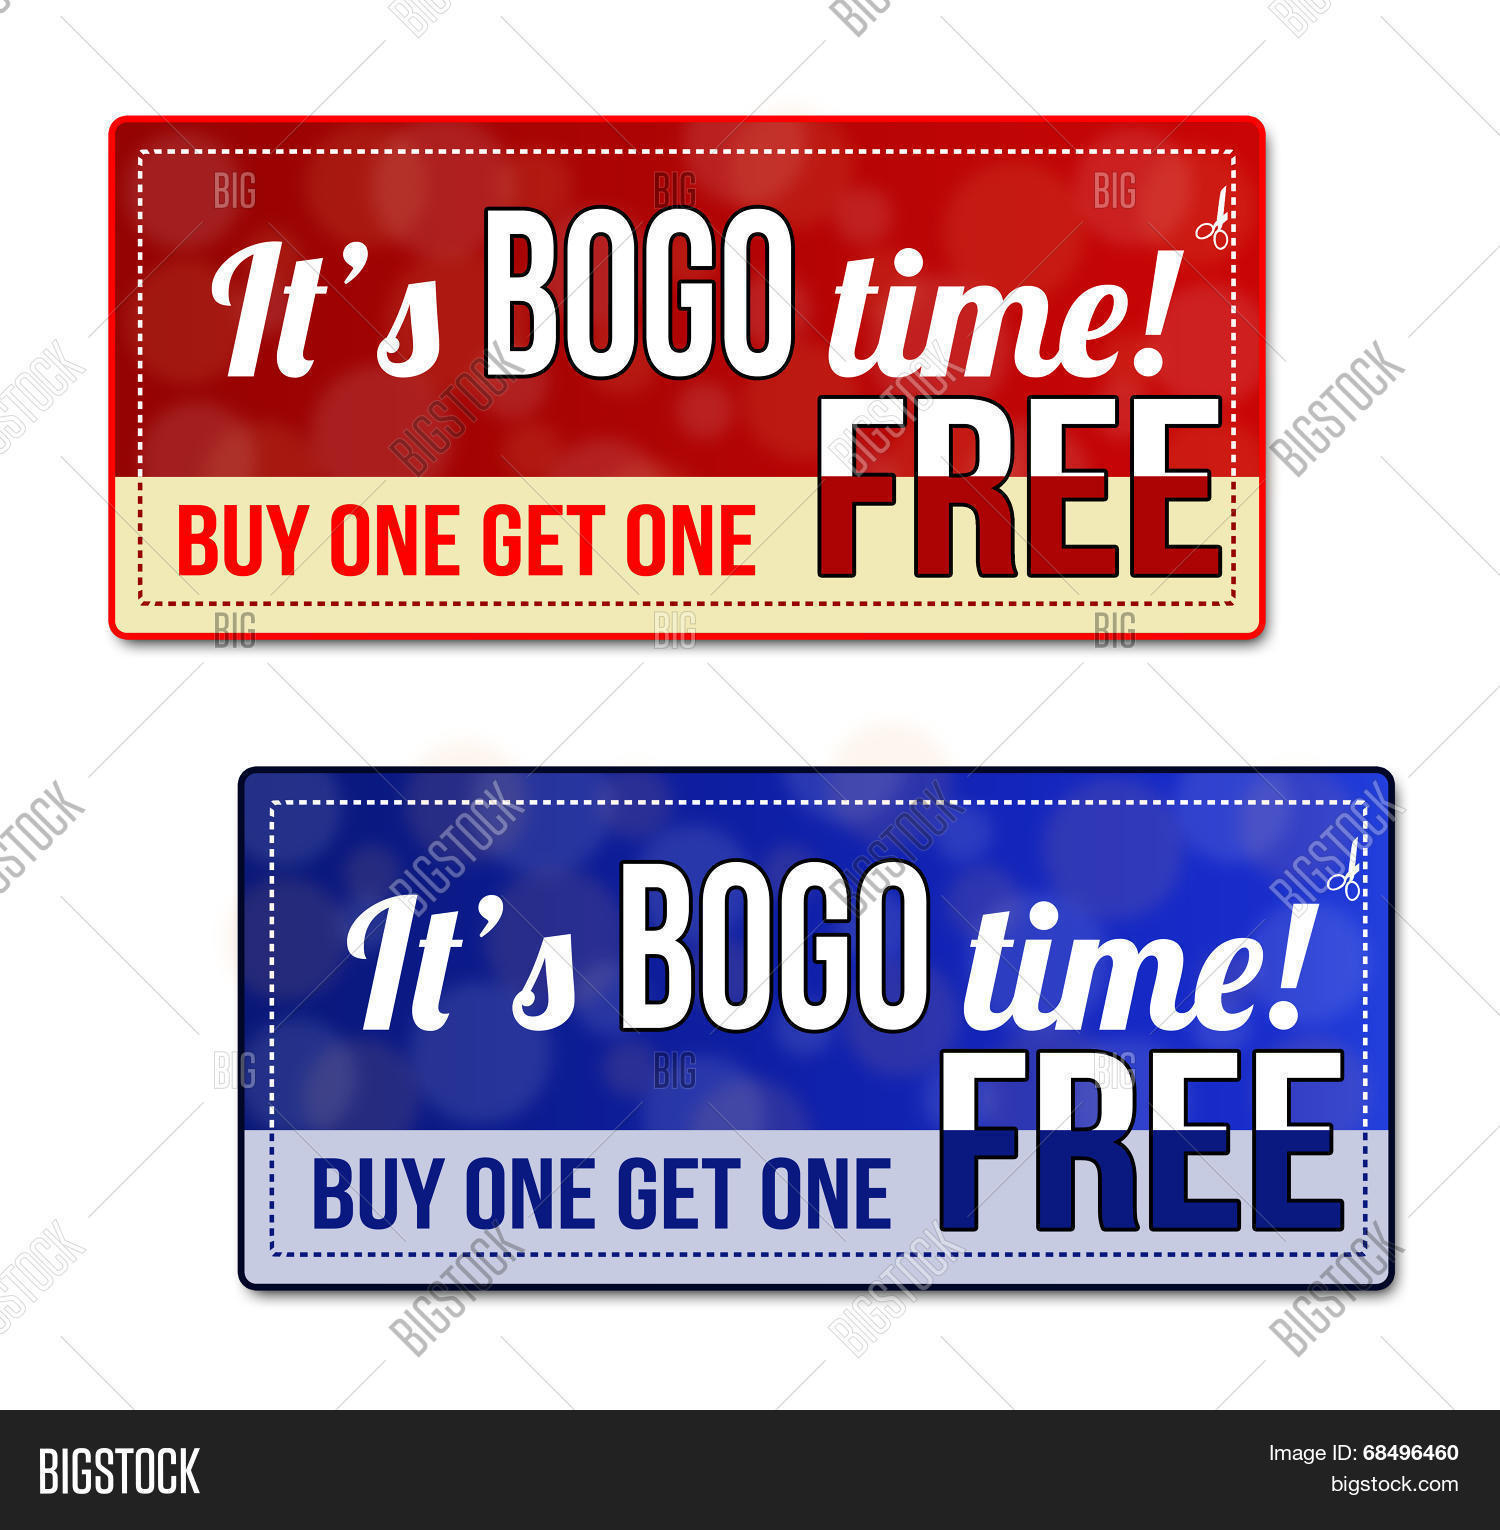 Bogo Coupon, Voucher Vector &amp;amp; Photo (Free Trial) | Bigstock with regard to Bogo Free Coupons Printable